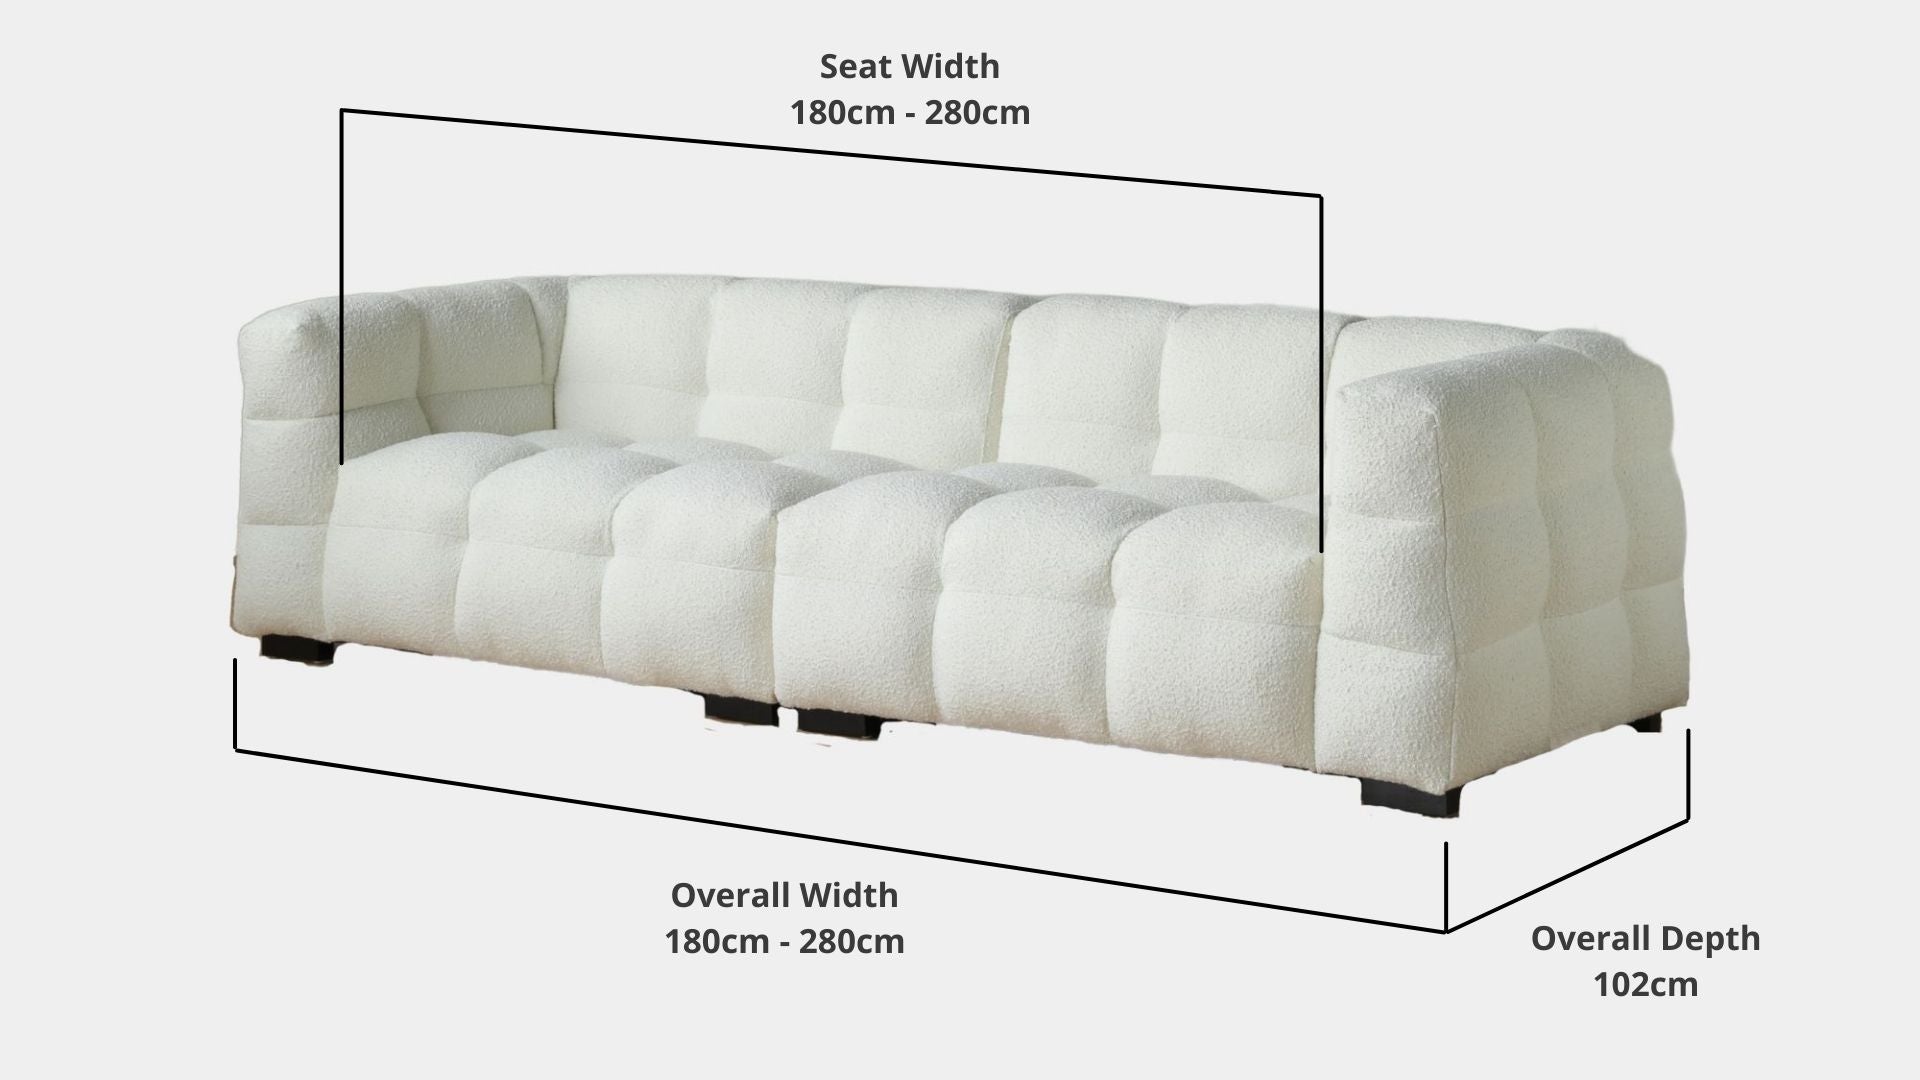 Details the key dimensions in terms of overall width, overall depth and seat width for Cutey Fabric Sofa